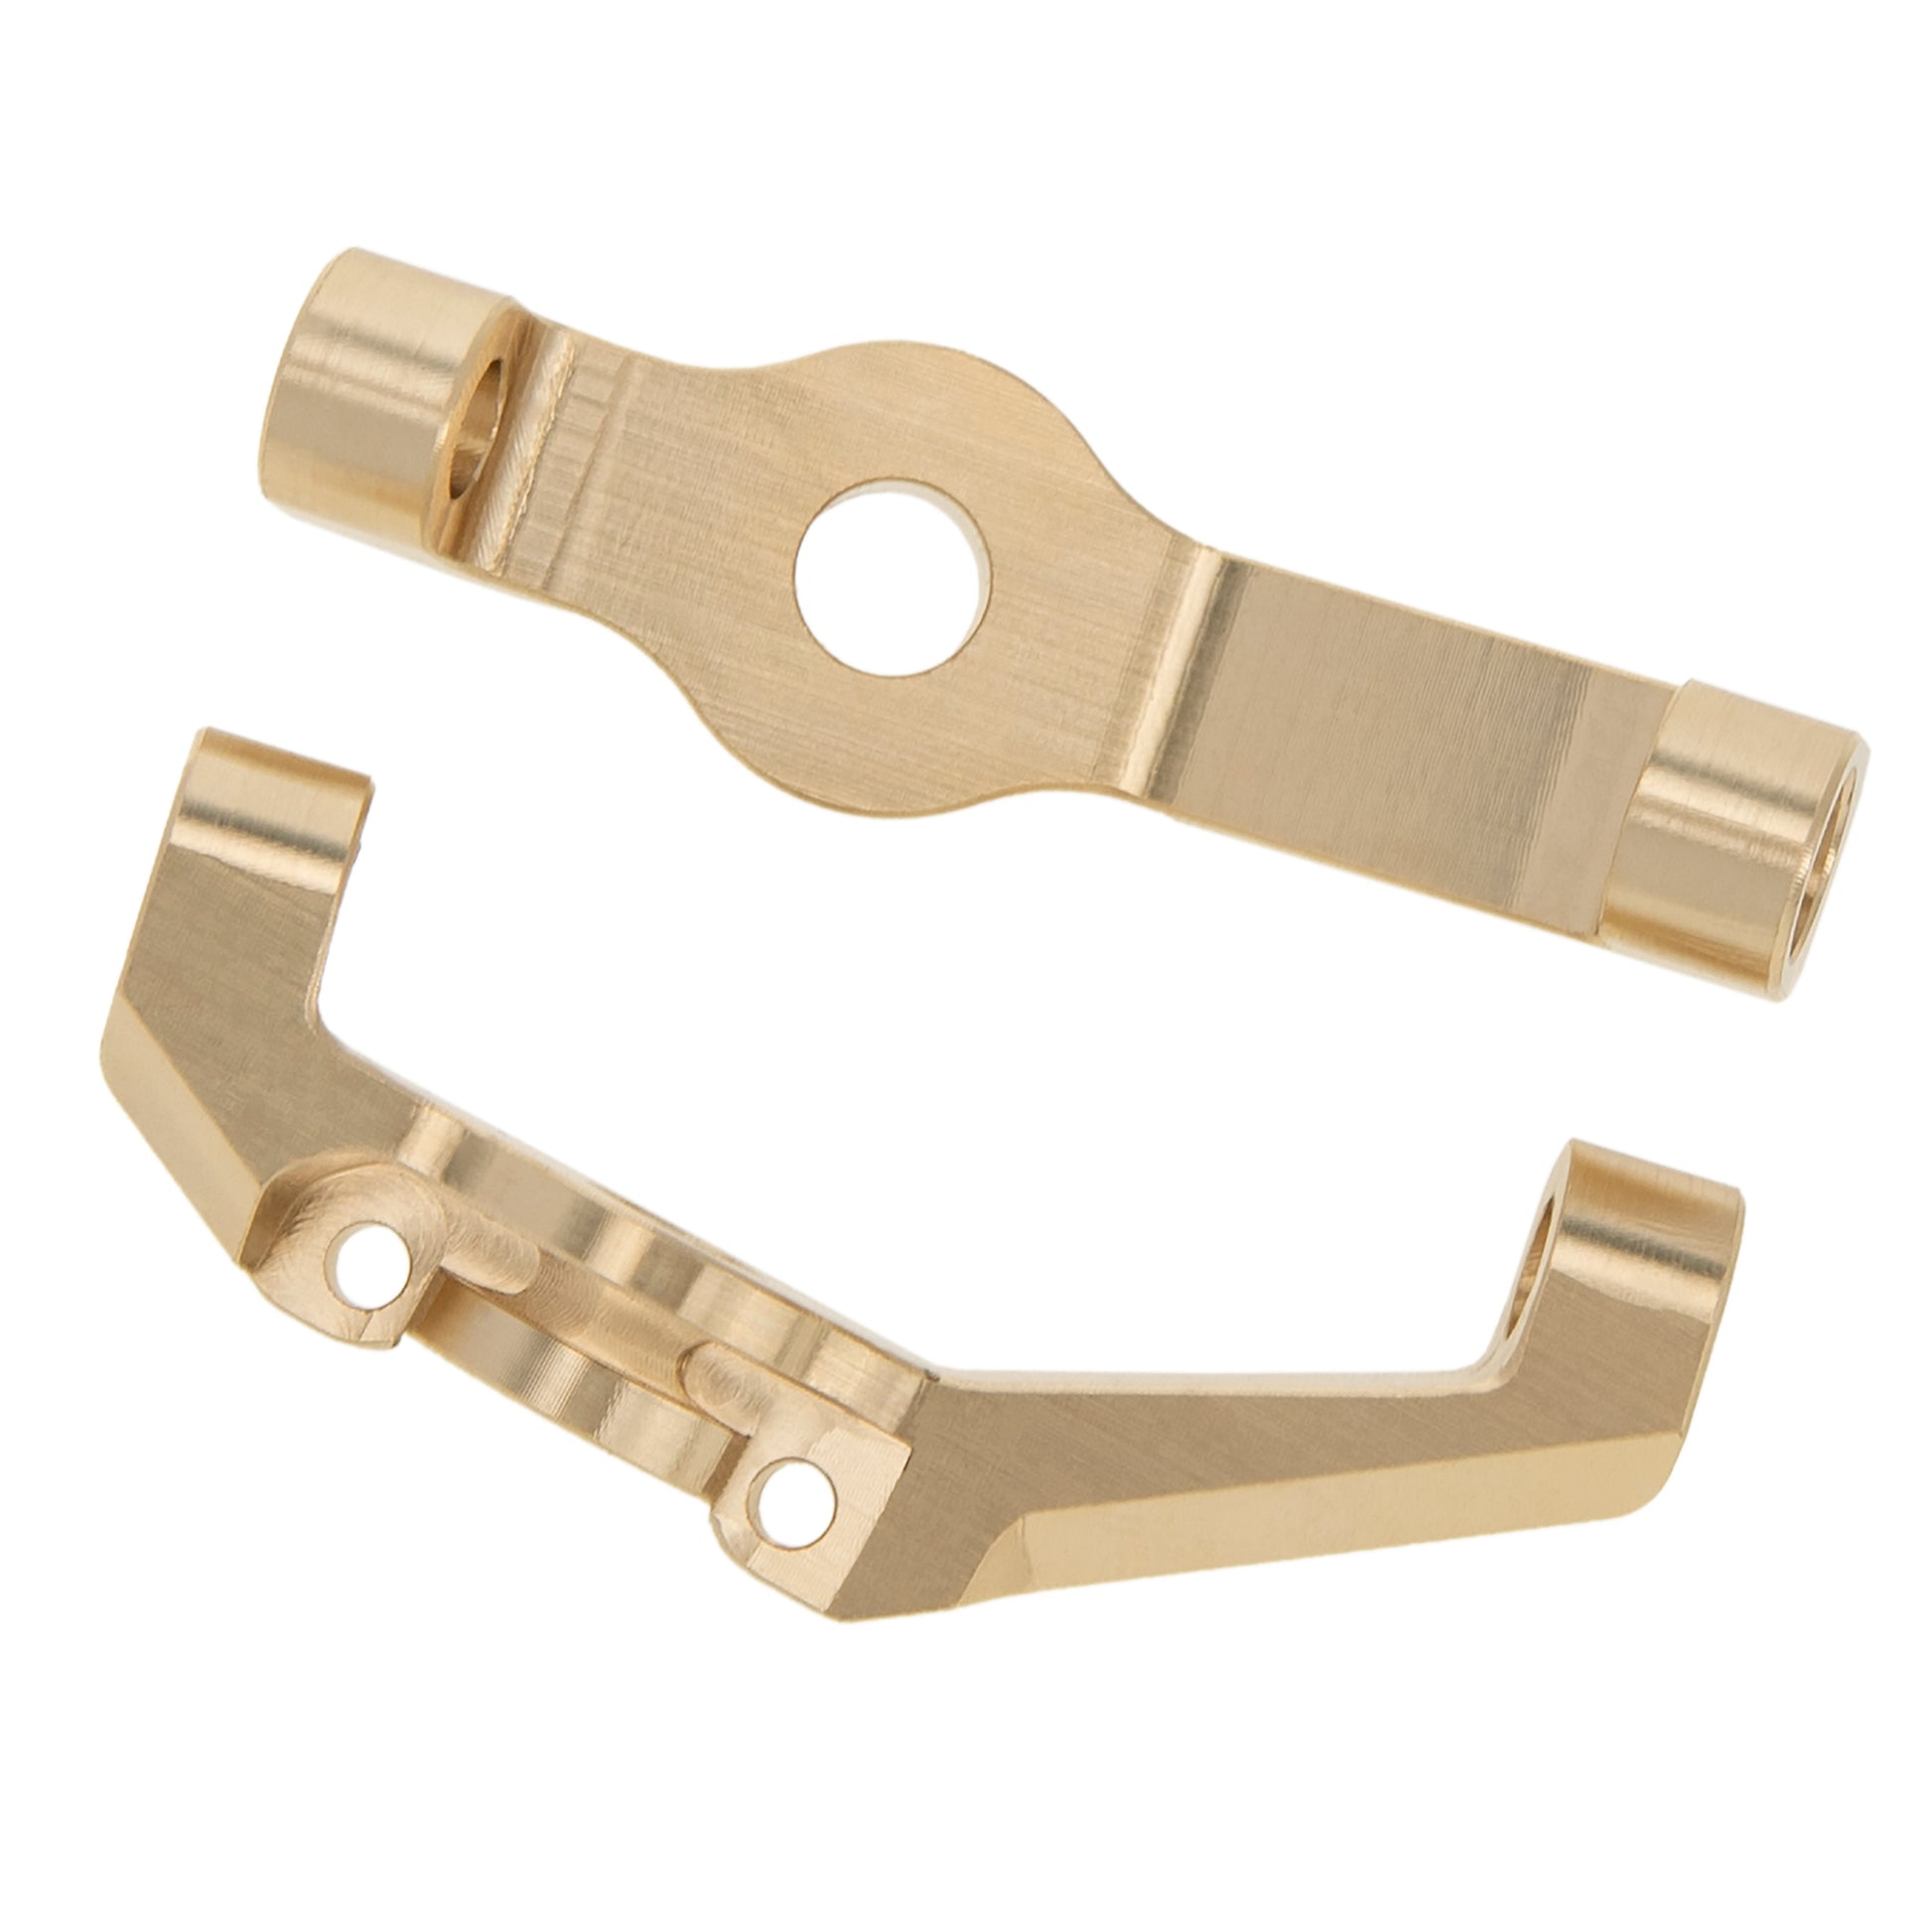 Gold Brass Caster Block C-Hub Carriers for UTB18